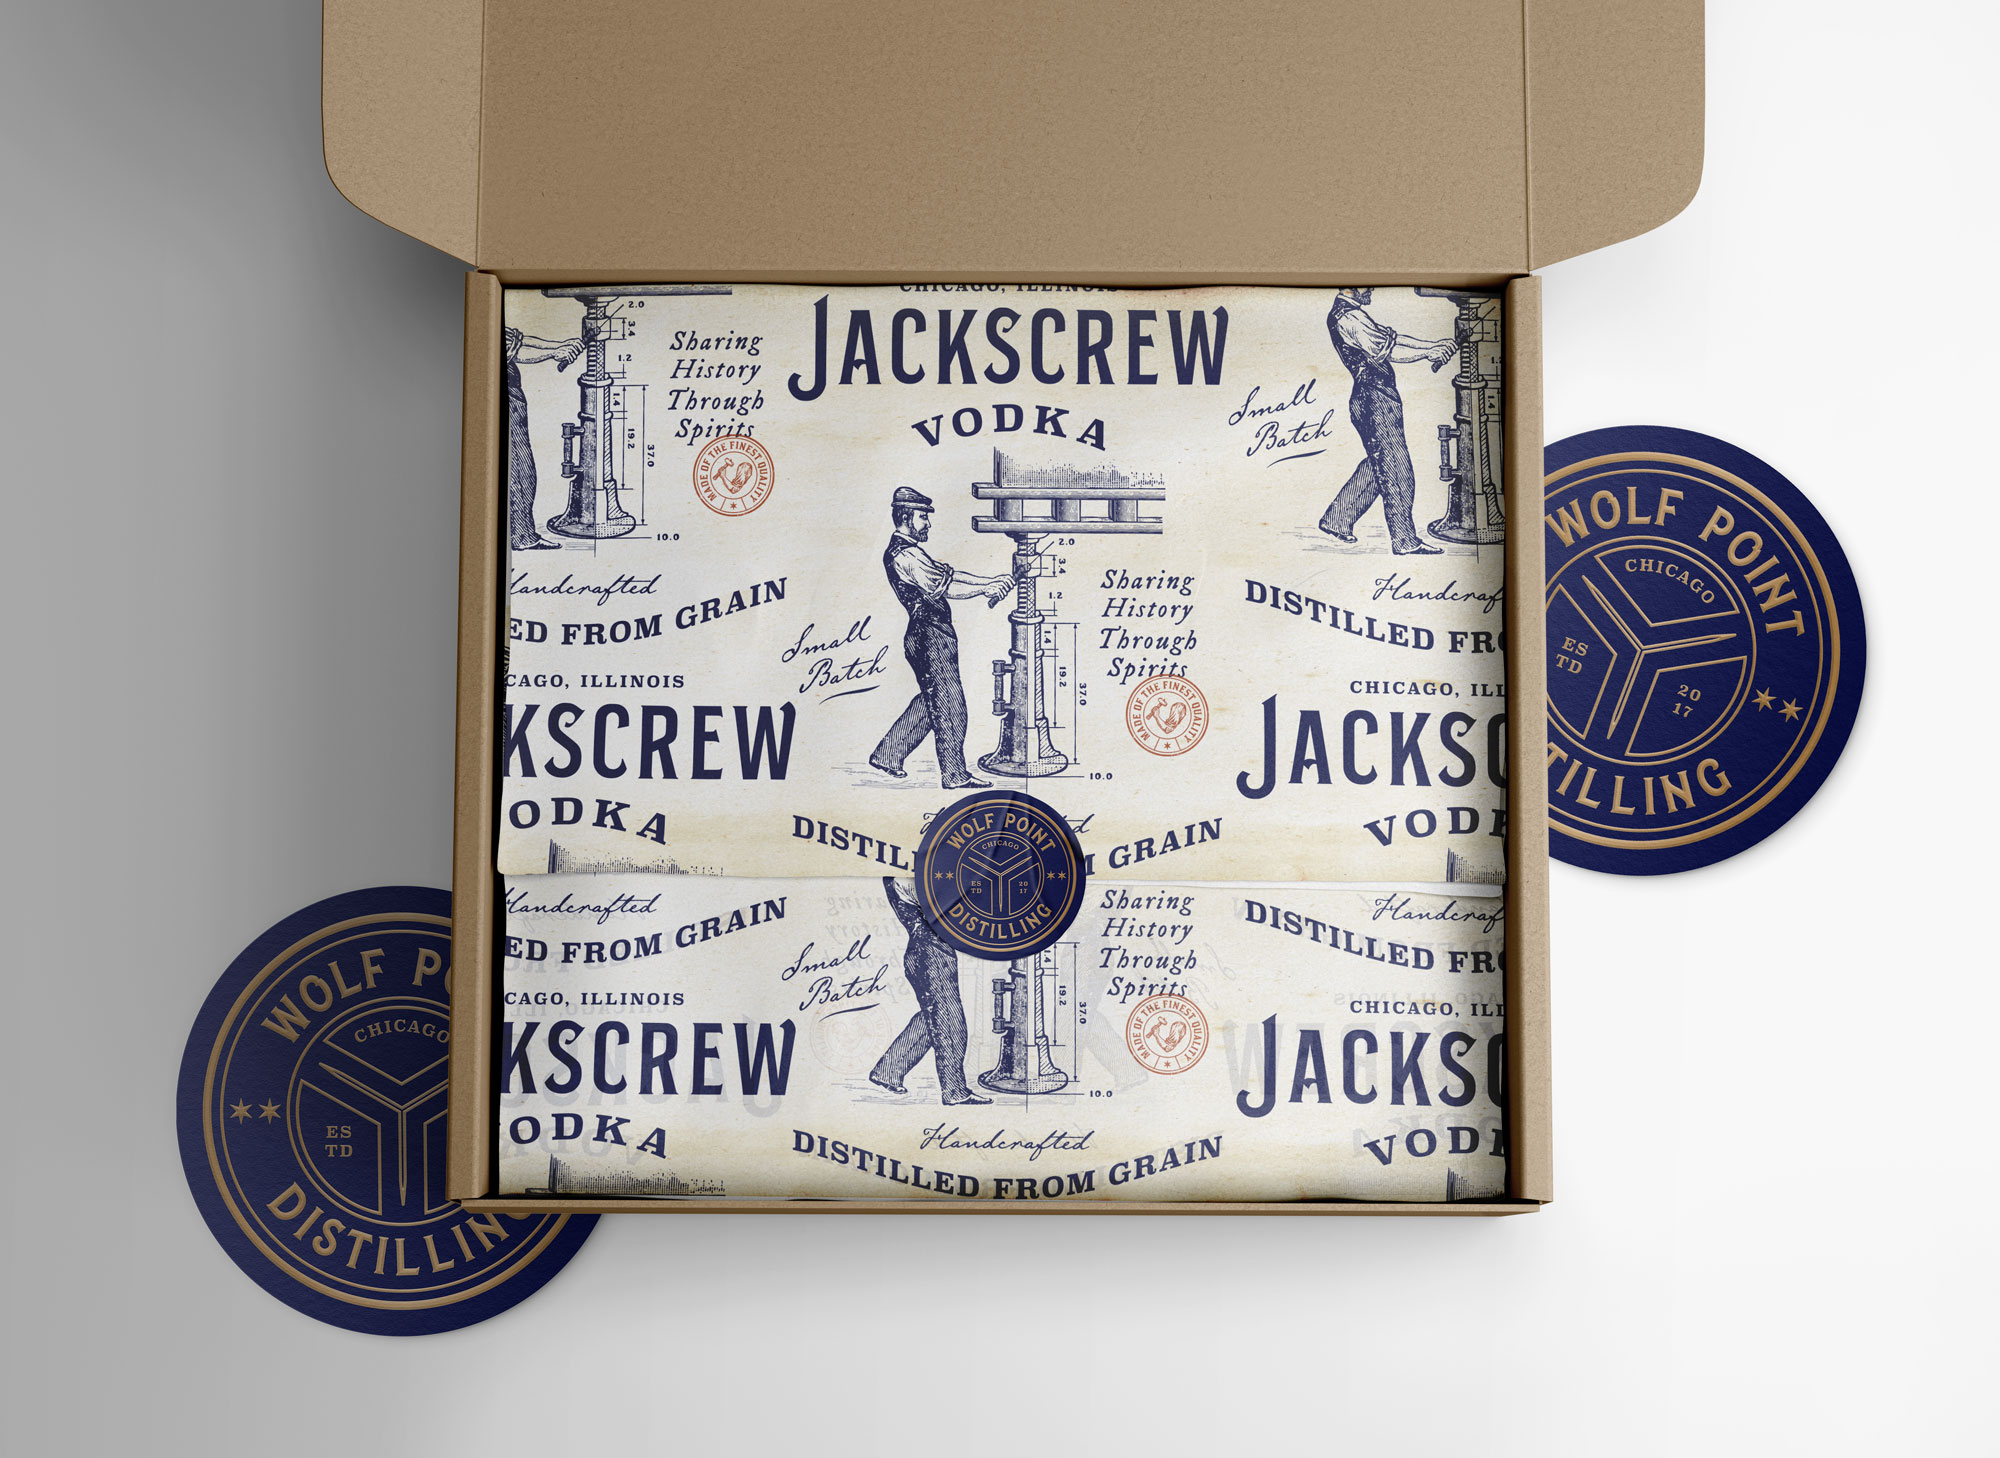 Jackscrew Vodka Branding and Packaging Design Concept and Story